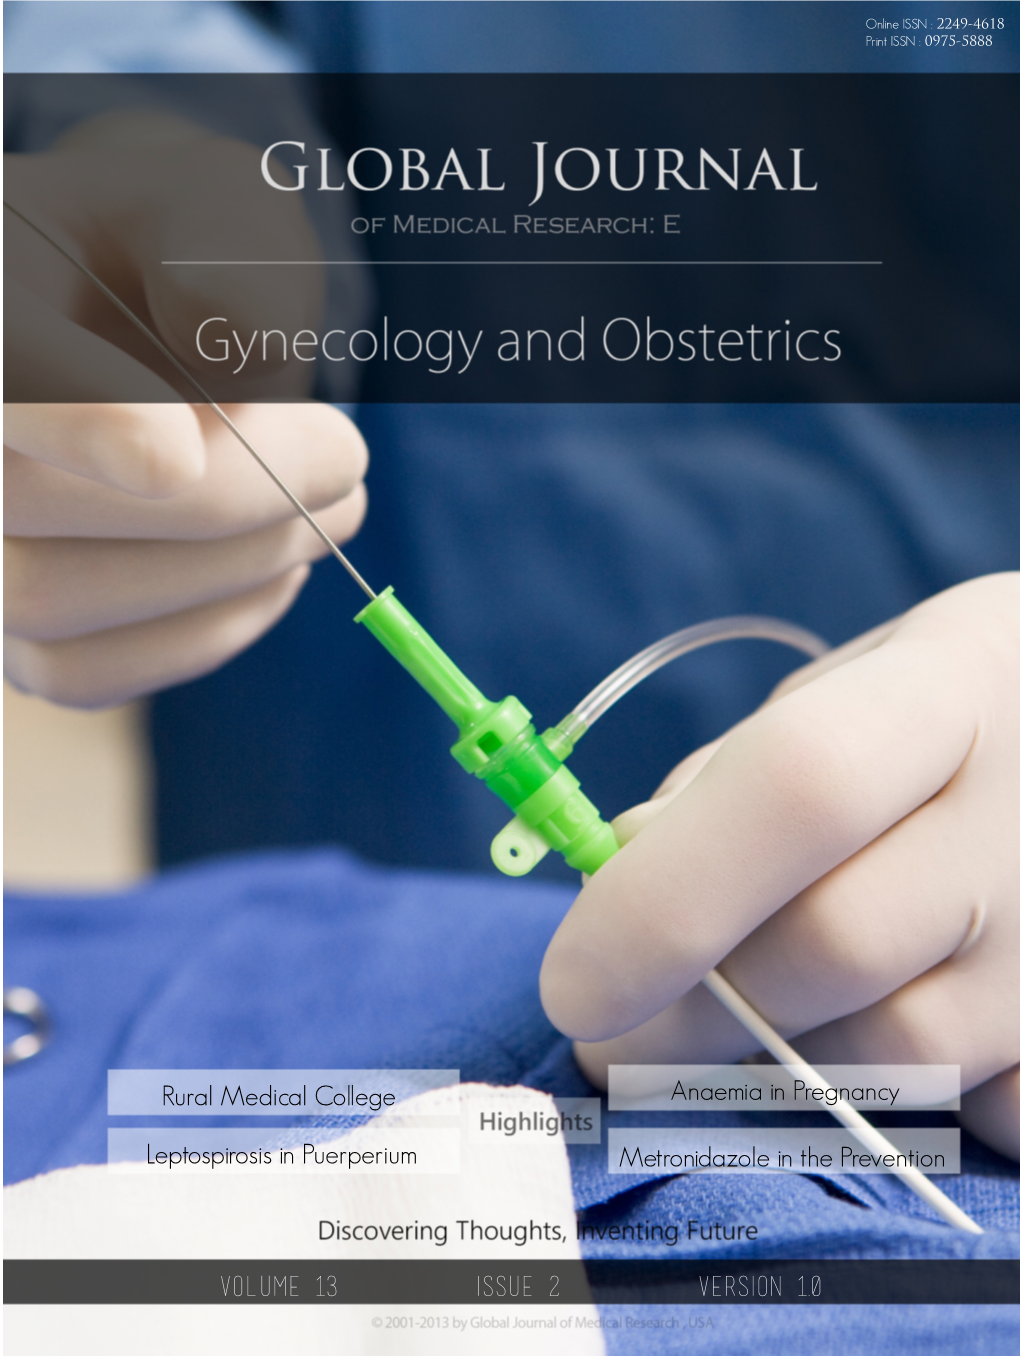 Global Journal of Medical Research: E Gynecology and Obstetrics